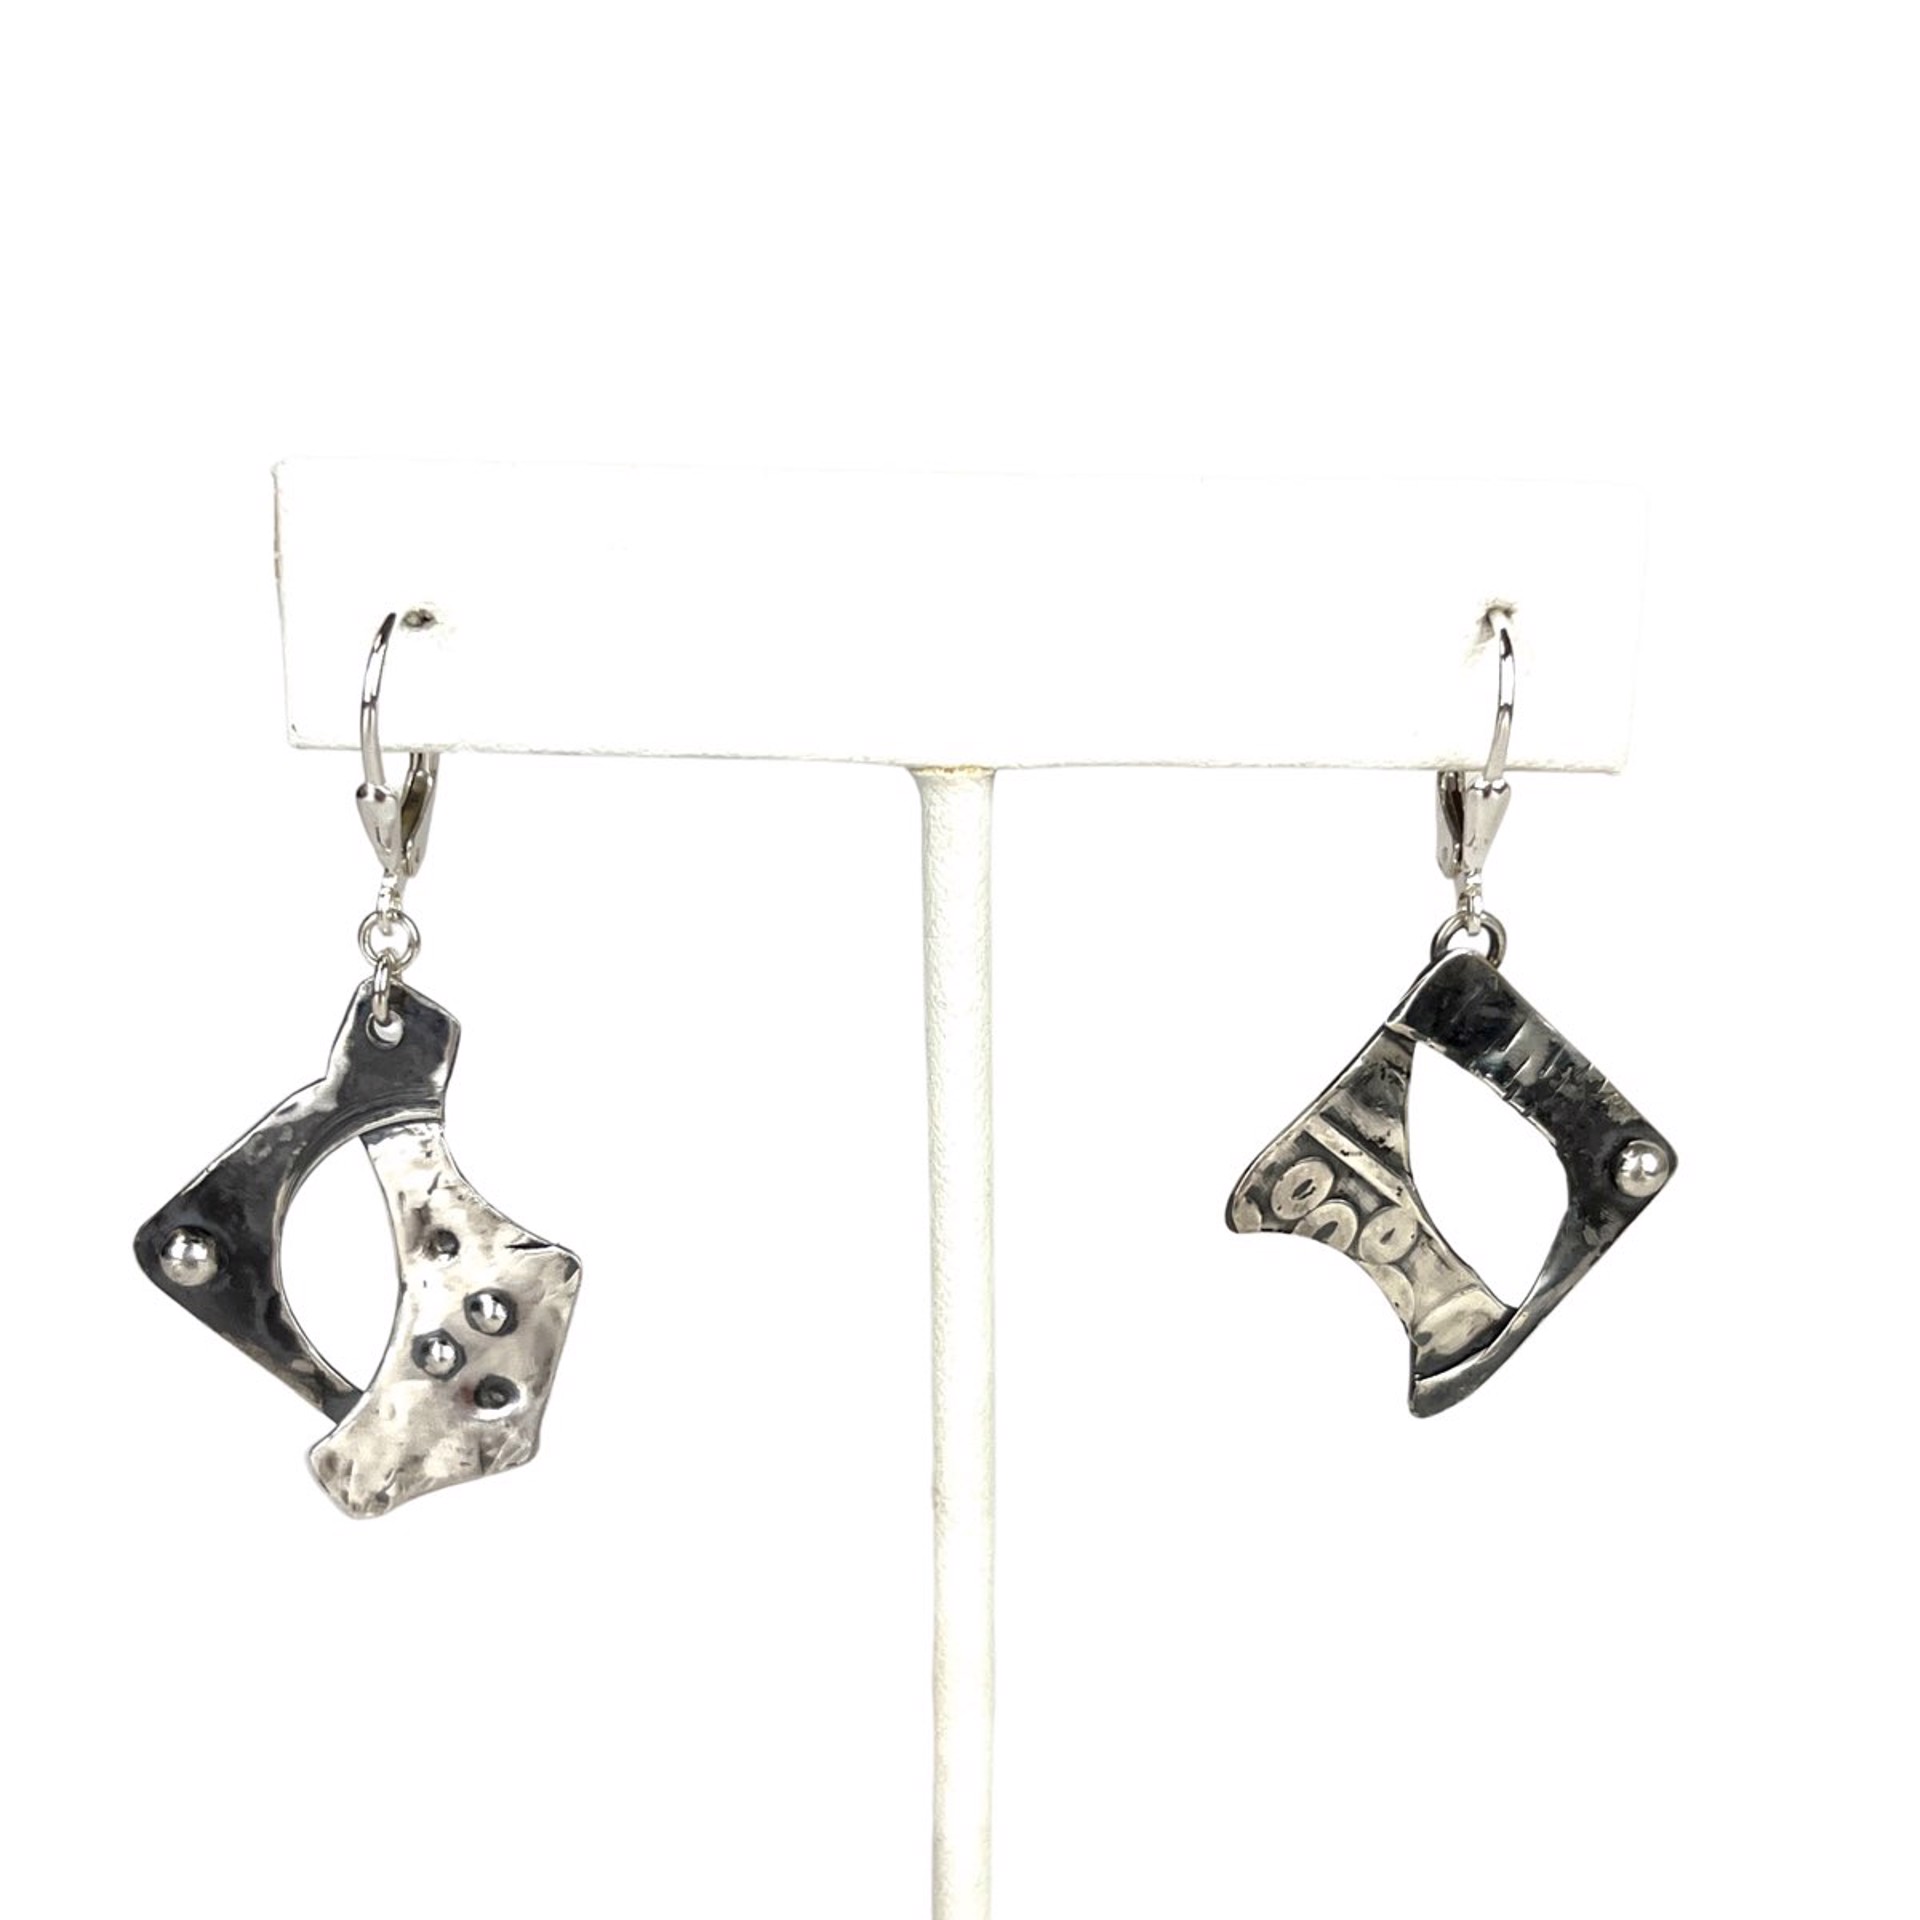 Scrappy Sqaure Sterling Silver Earrings by Nola Smodic